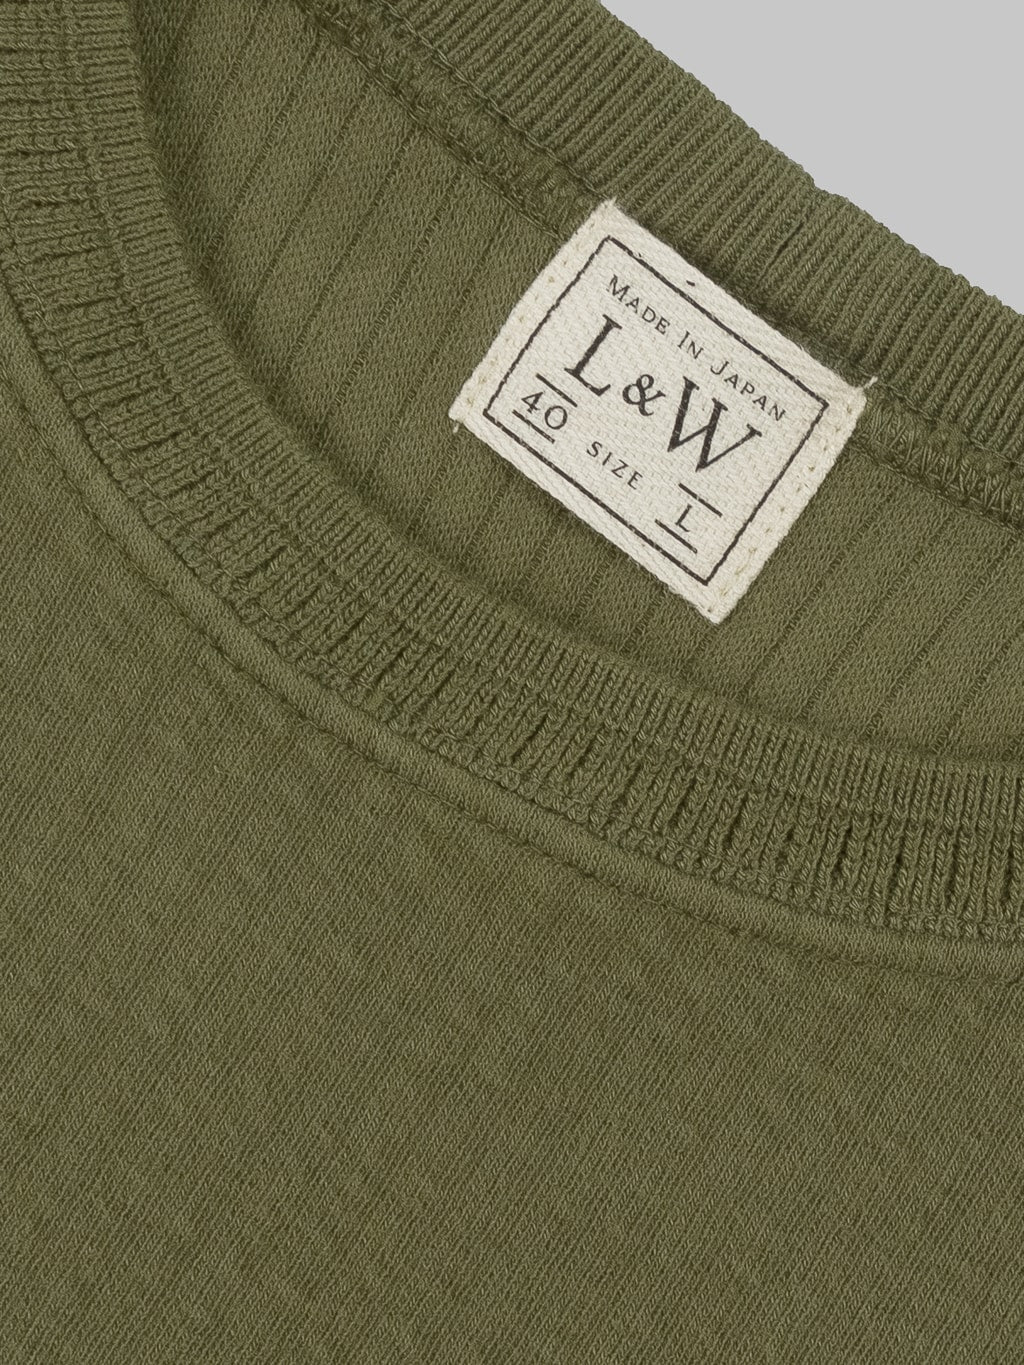 Loop Weft Double Face Jacquard crewneck Thermal army olive  interior tag